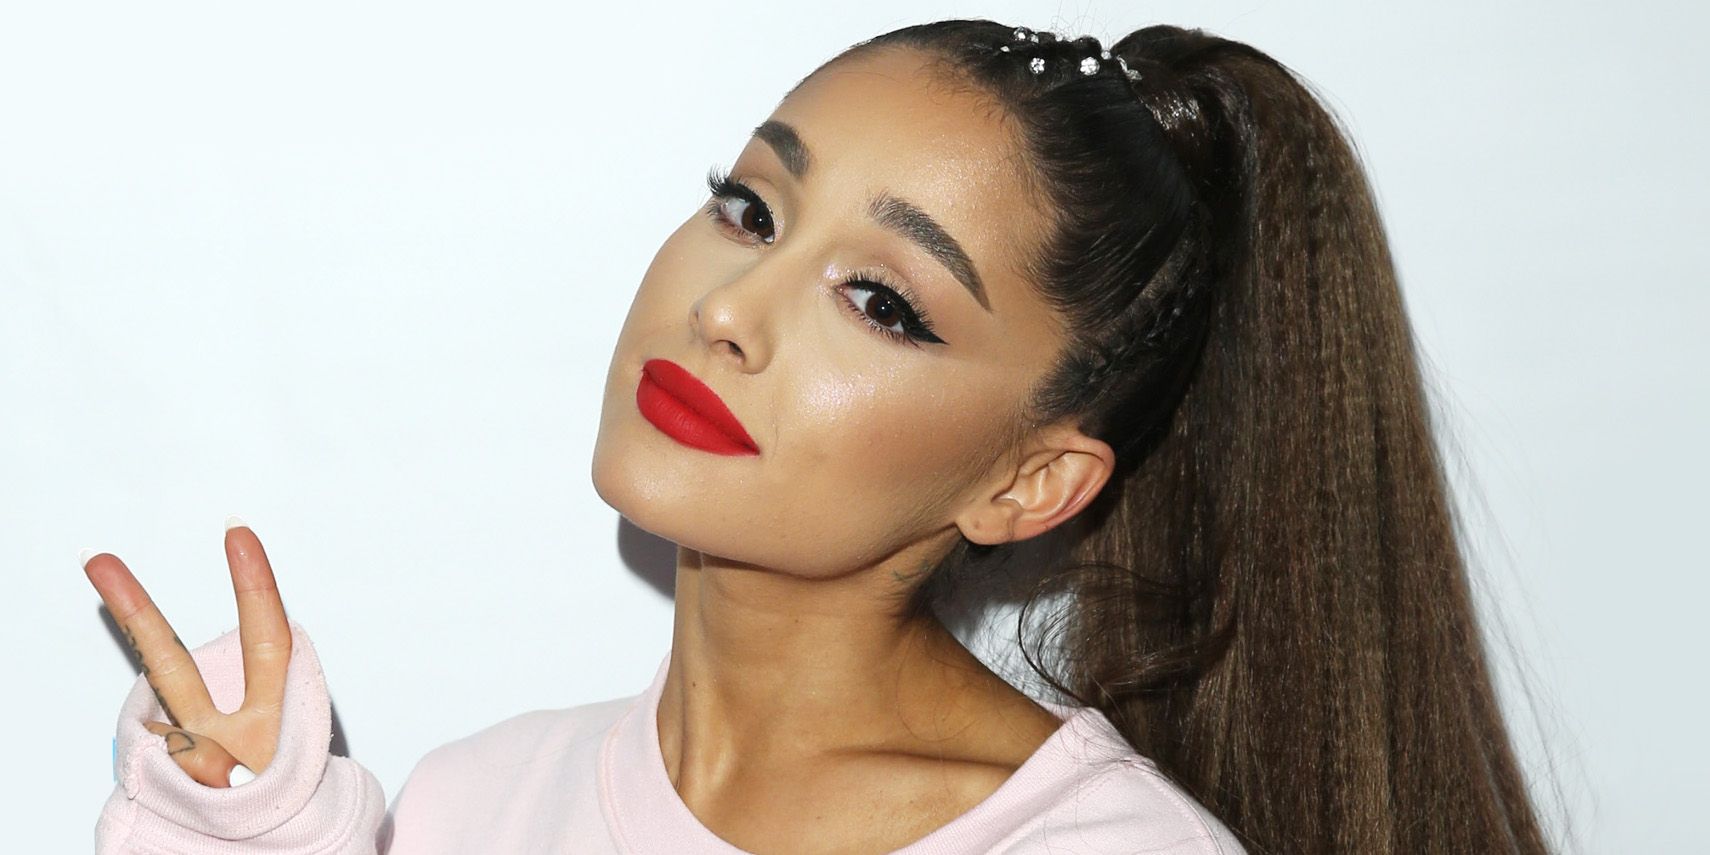 forberede Making hud How to Get Ariana Grande's Winged Liner - Ariana Grande Makeup Artist Tips